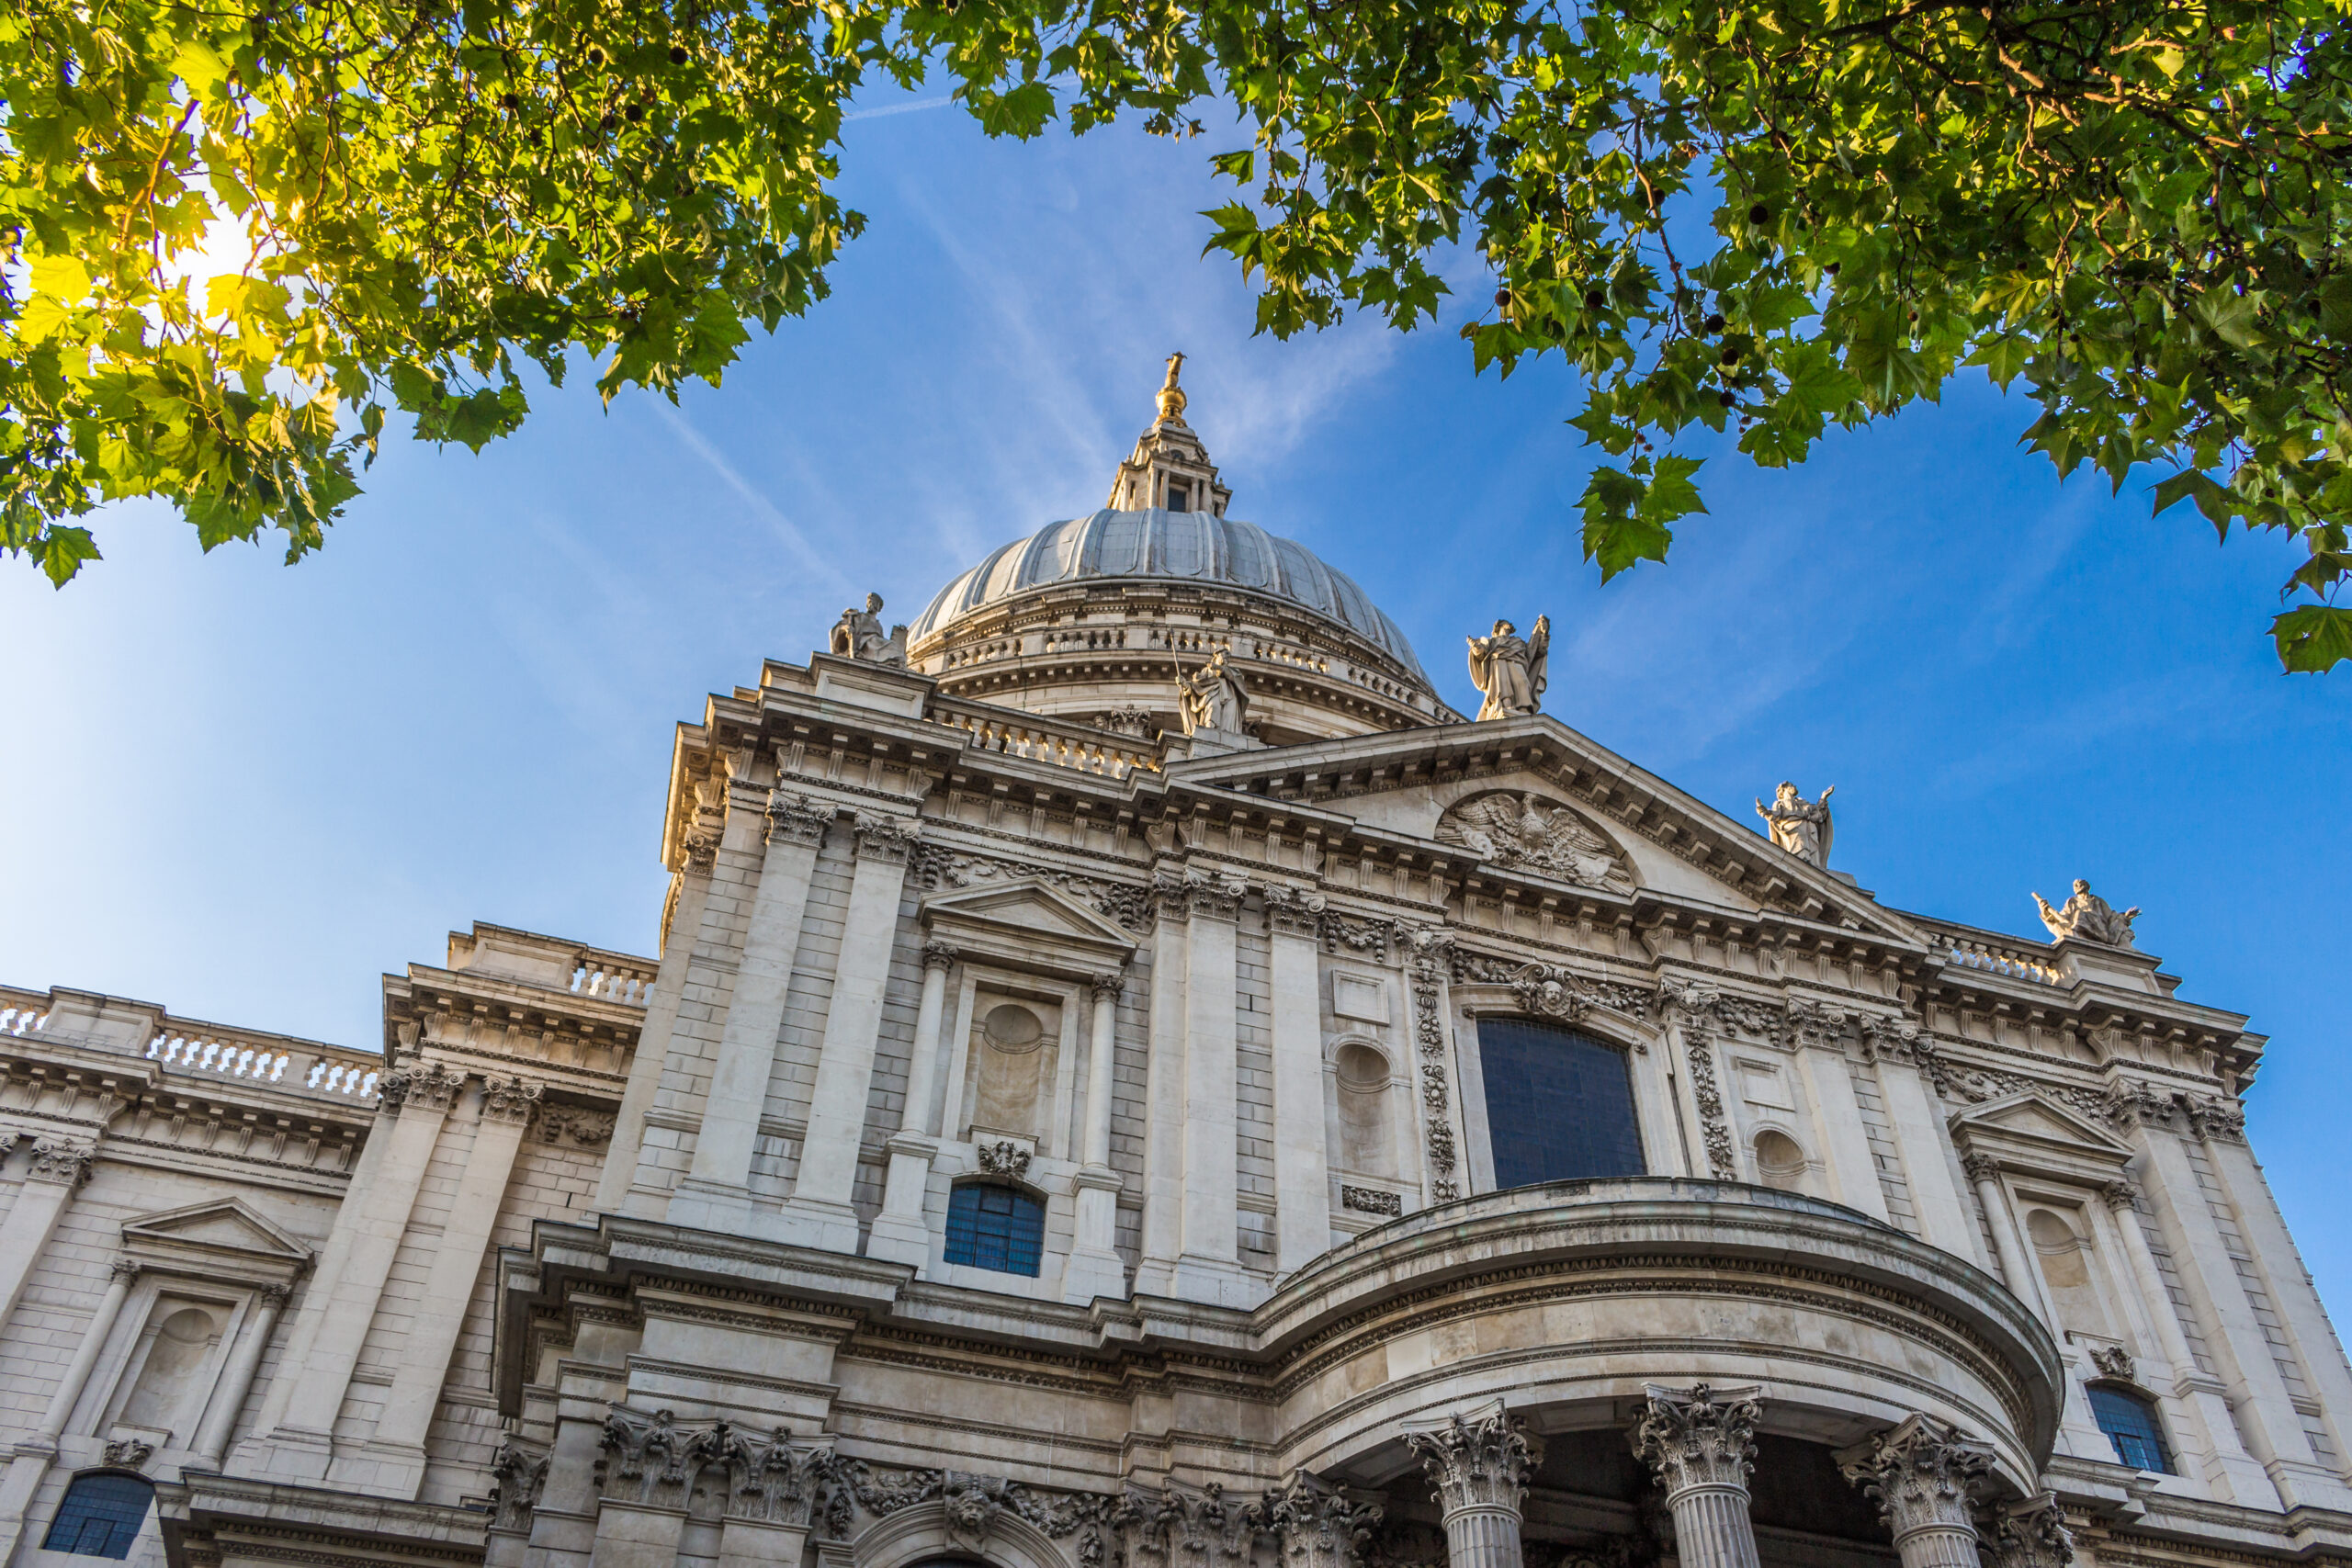 St. Paul's cathedral in sunny day. London, England